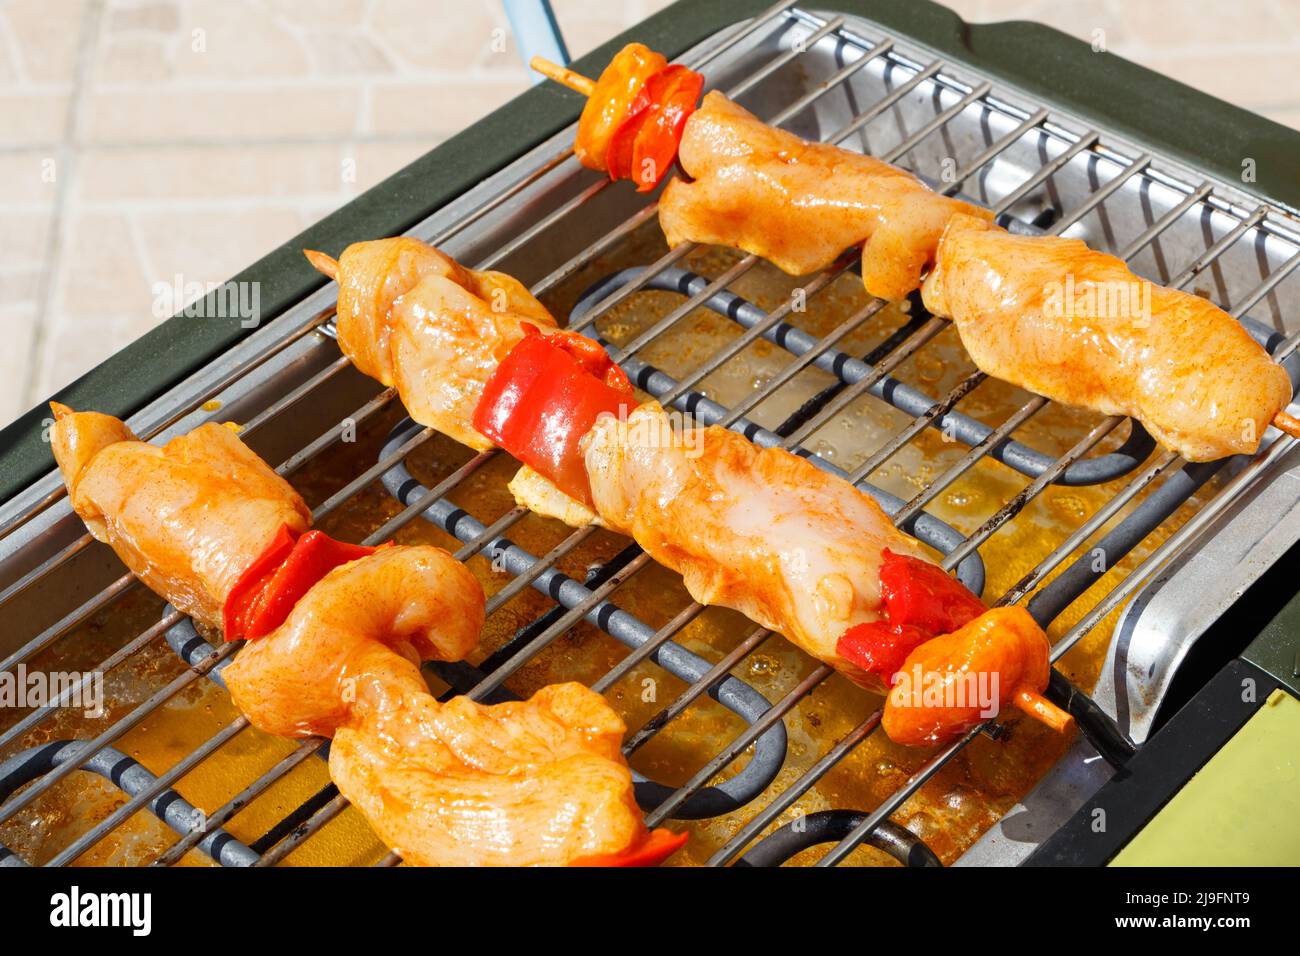 Marinated chicken brochette on the rack of an electric barbecue Stock Photo